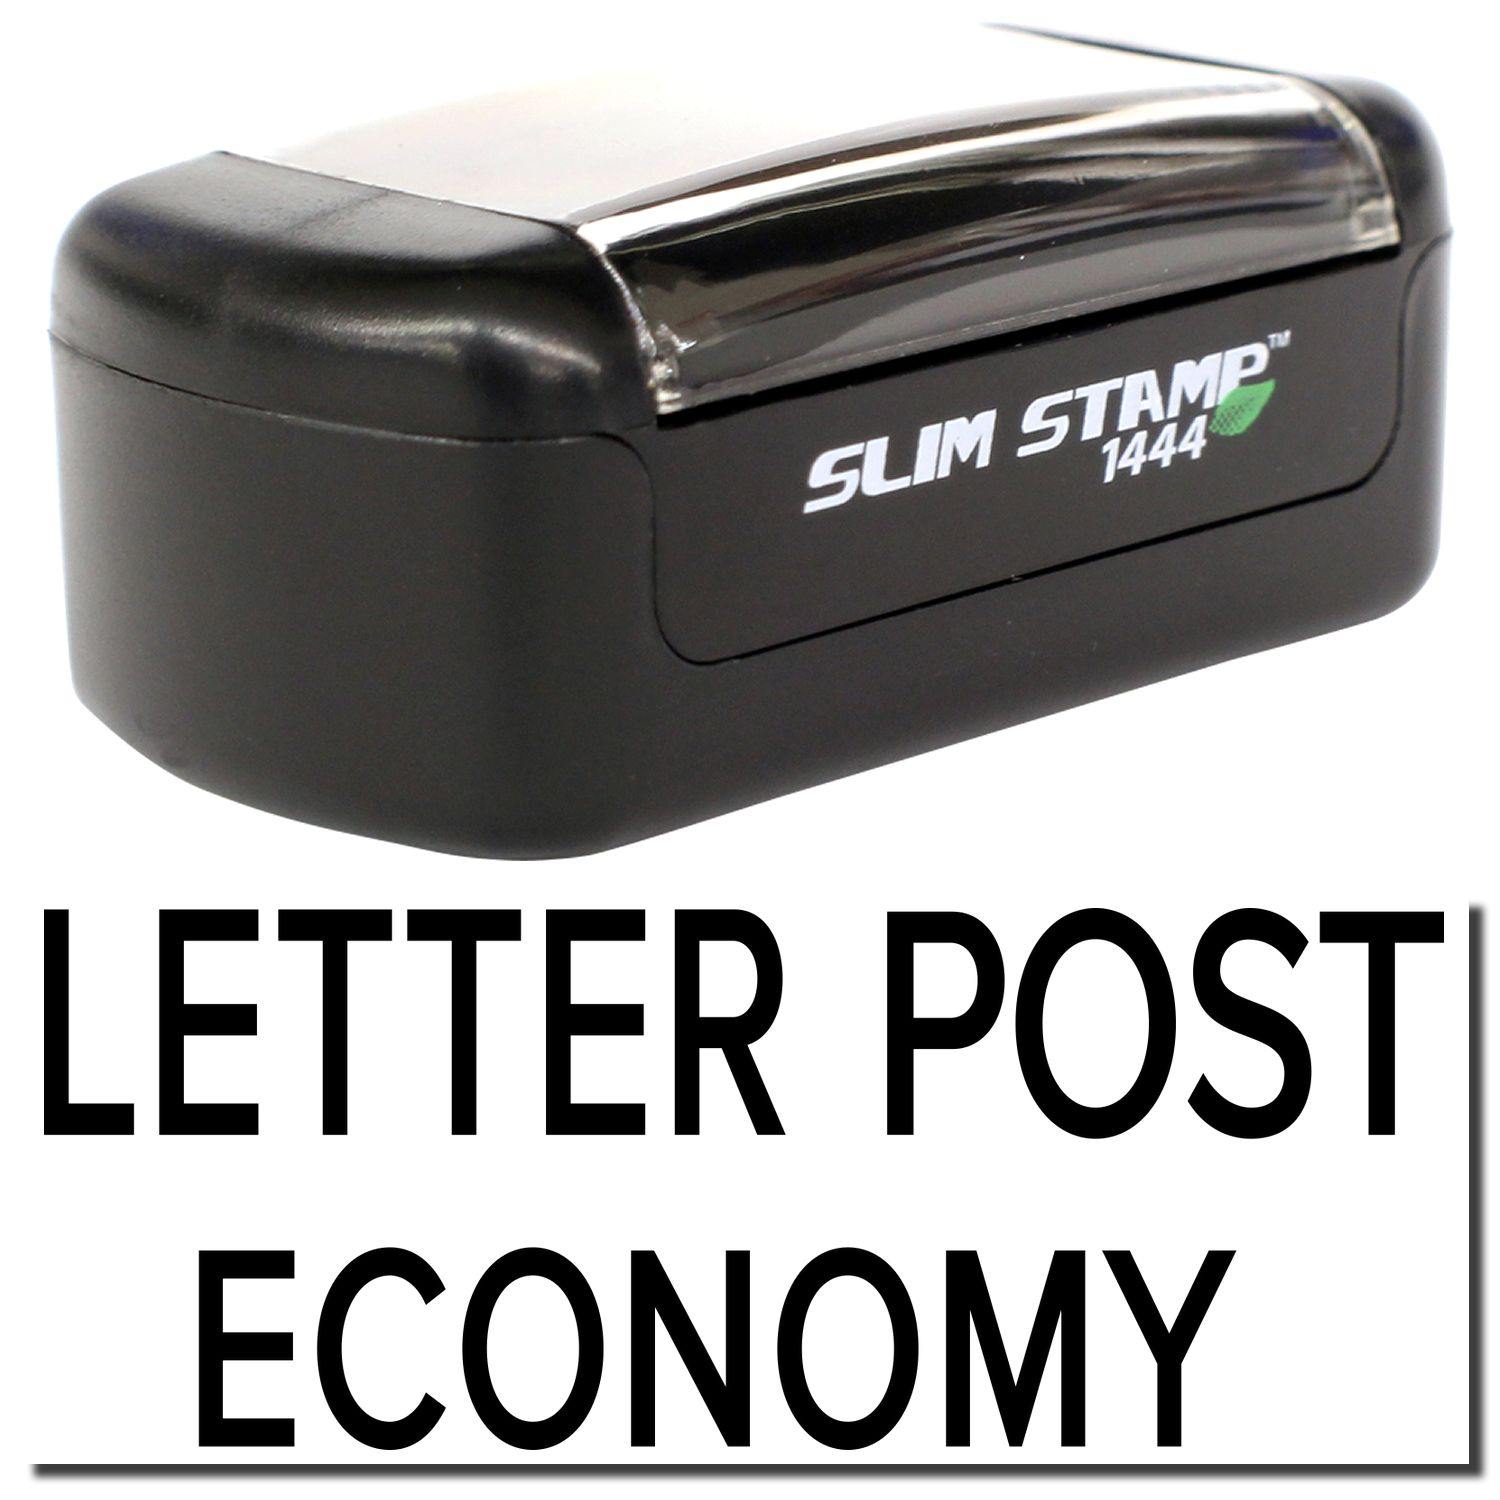 A stock office pre-inked stamp with a stamped image showing how the text "LETTER POST ECONOMY" is displayed after stamping.